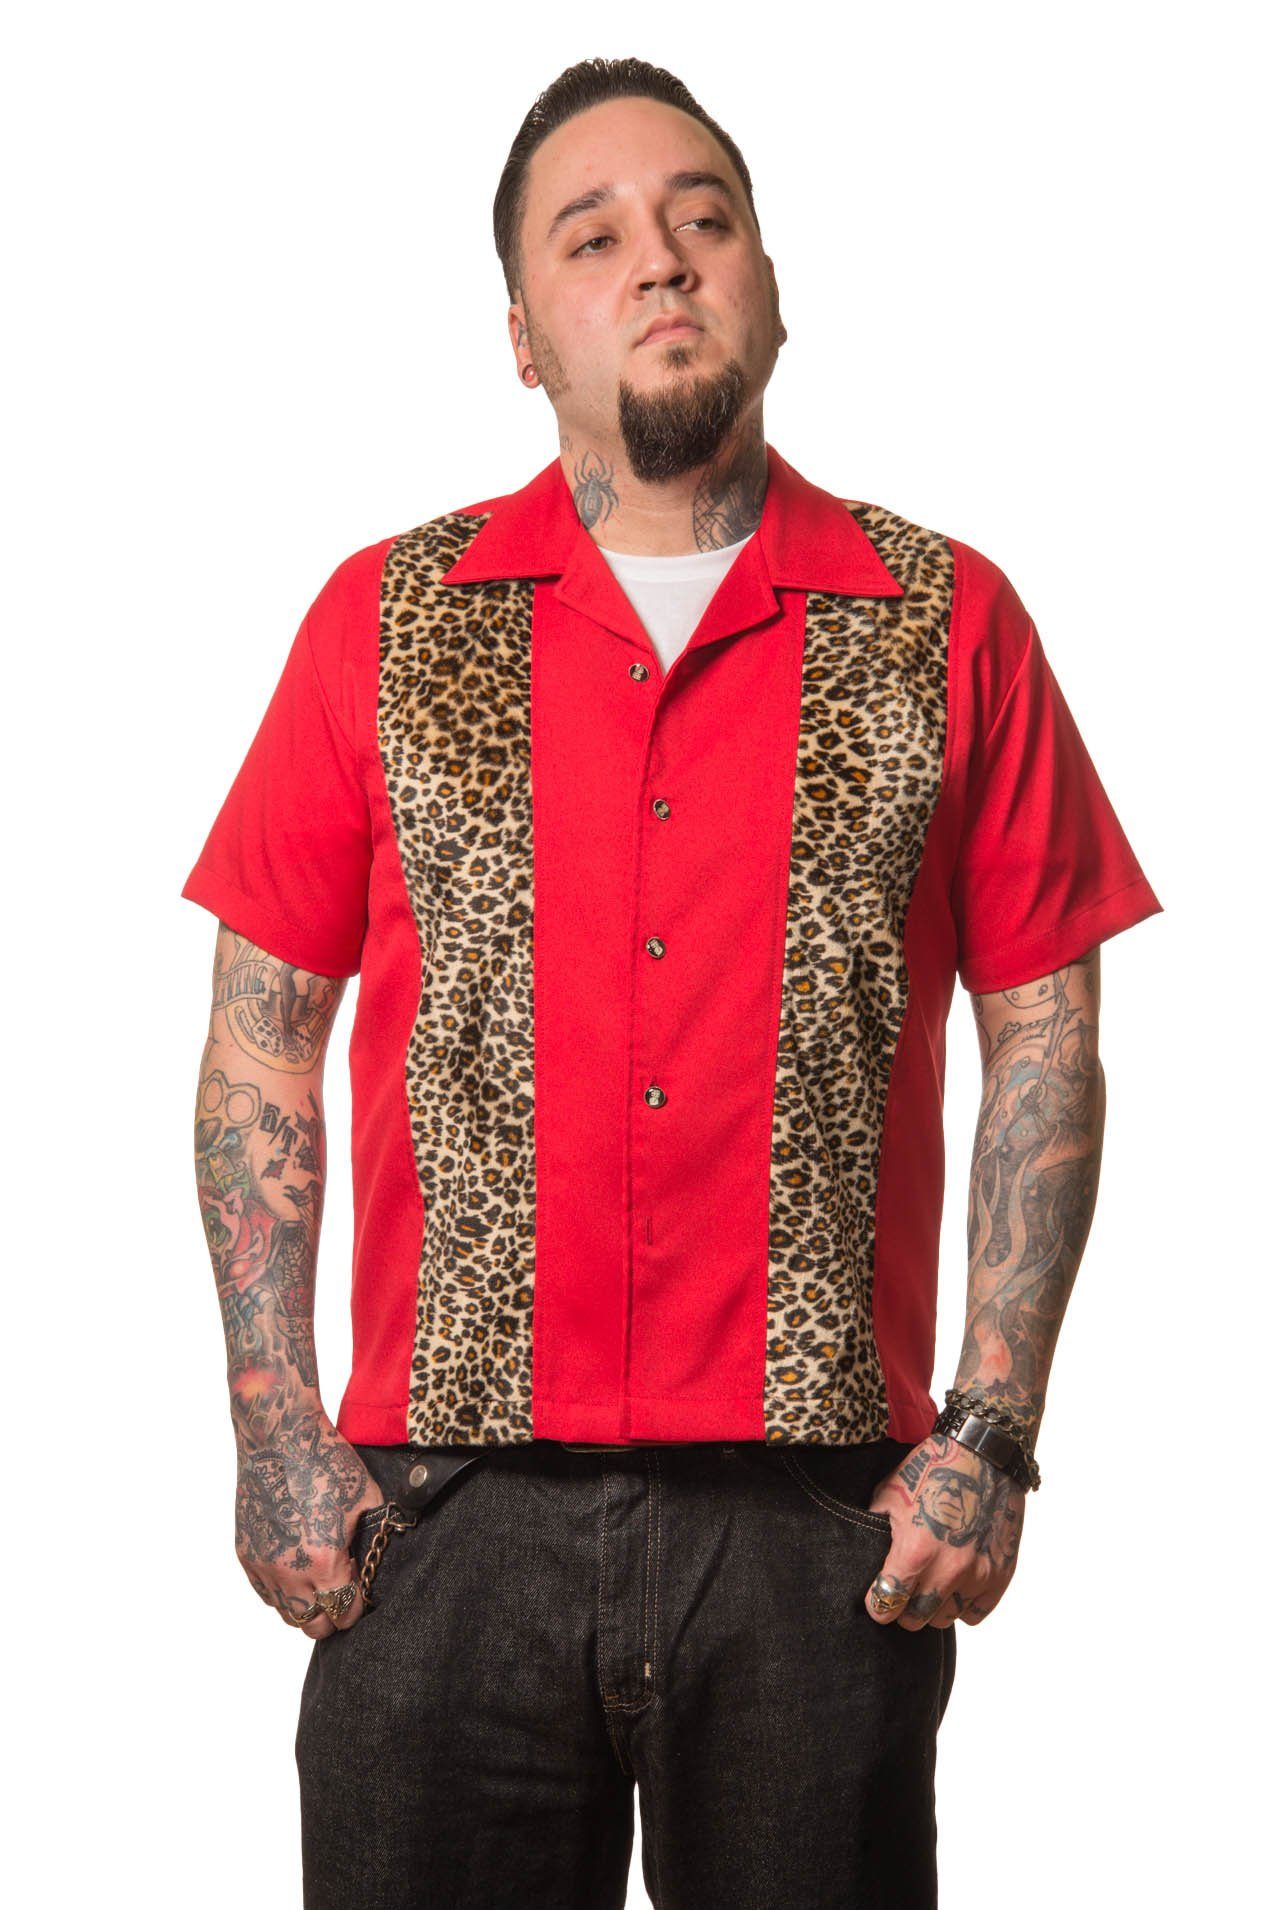 Steady Clothing Kurzarmhemd Leopard Muster Rot Retro Vintage Bowling Shirt Rockabilly